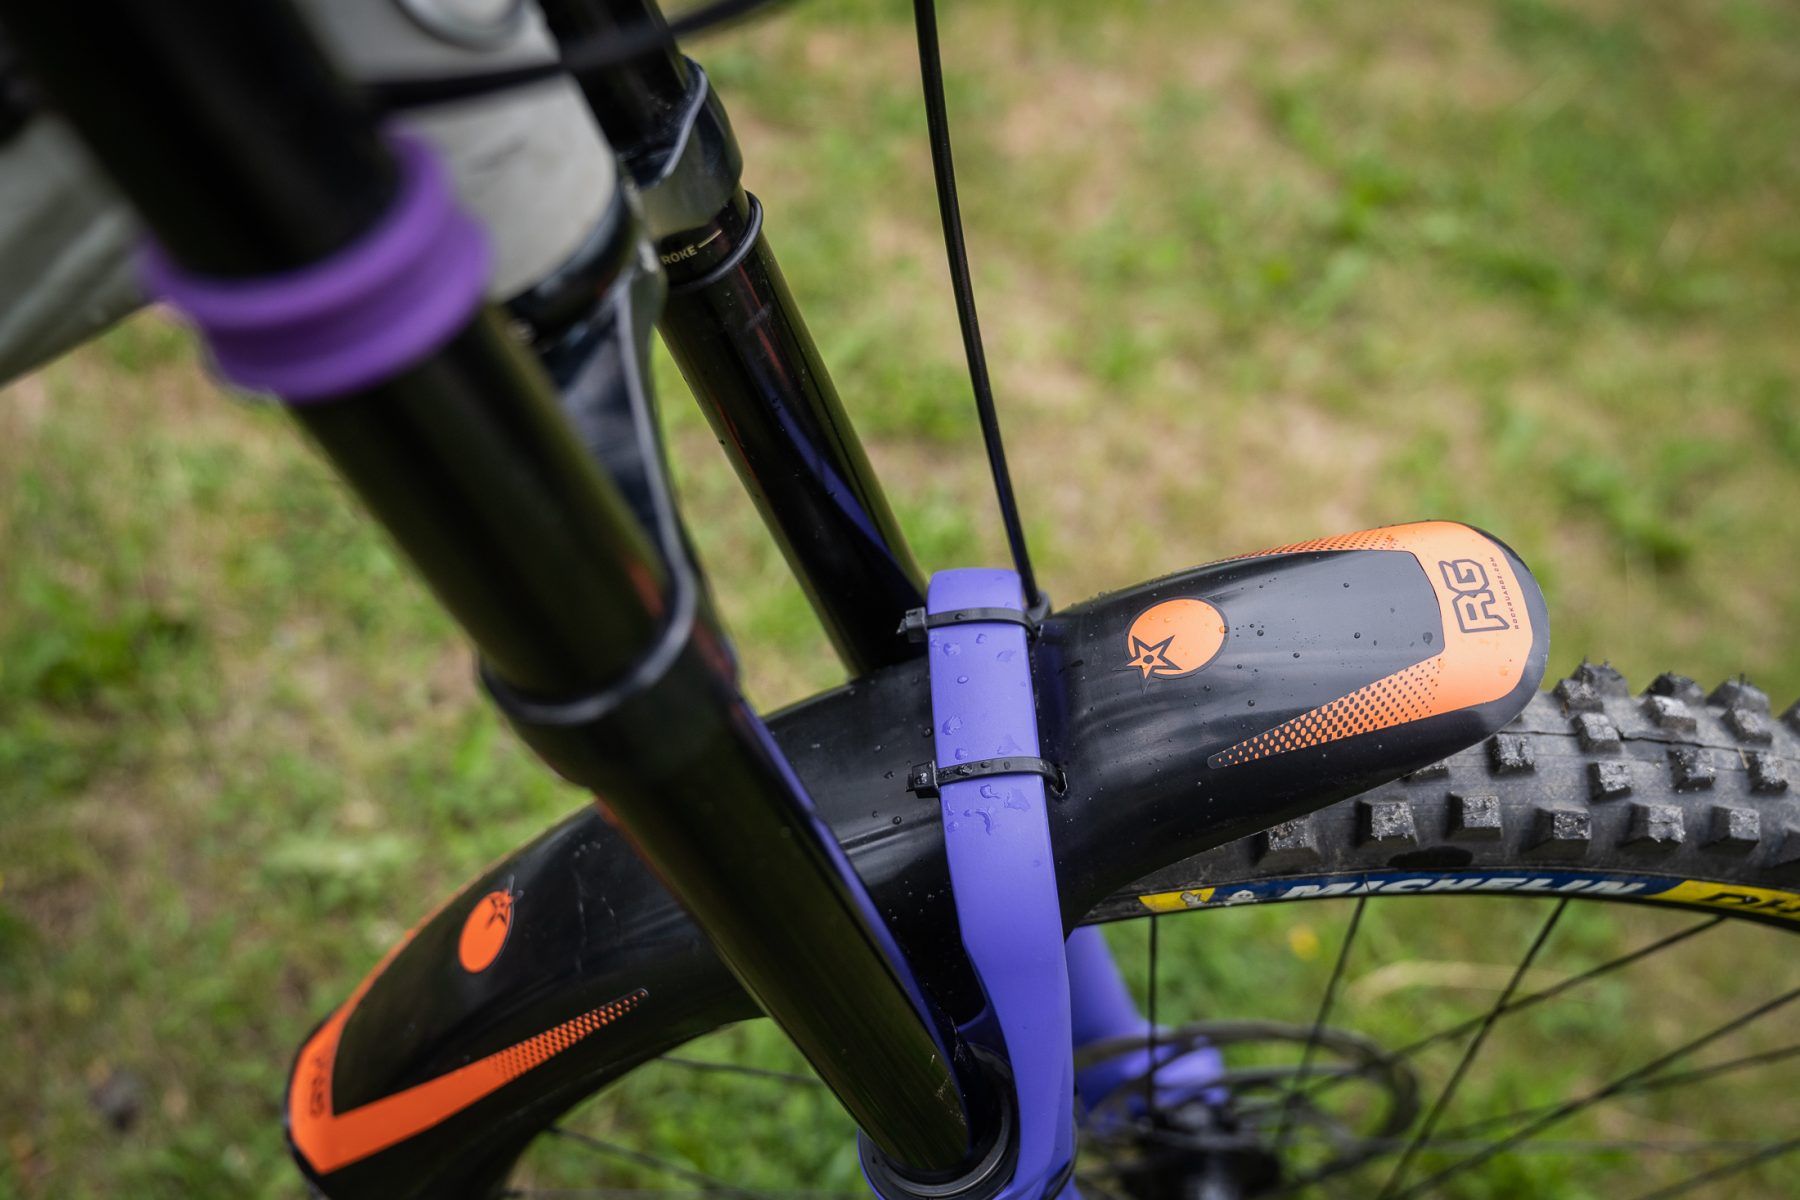 Joe Connell's Orange Stage 6 with prototype dual crown Formula fork